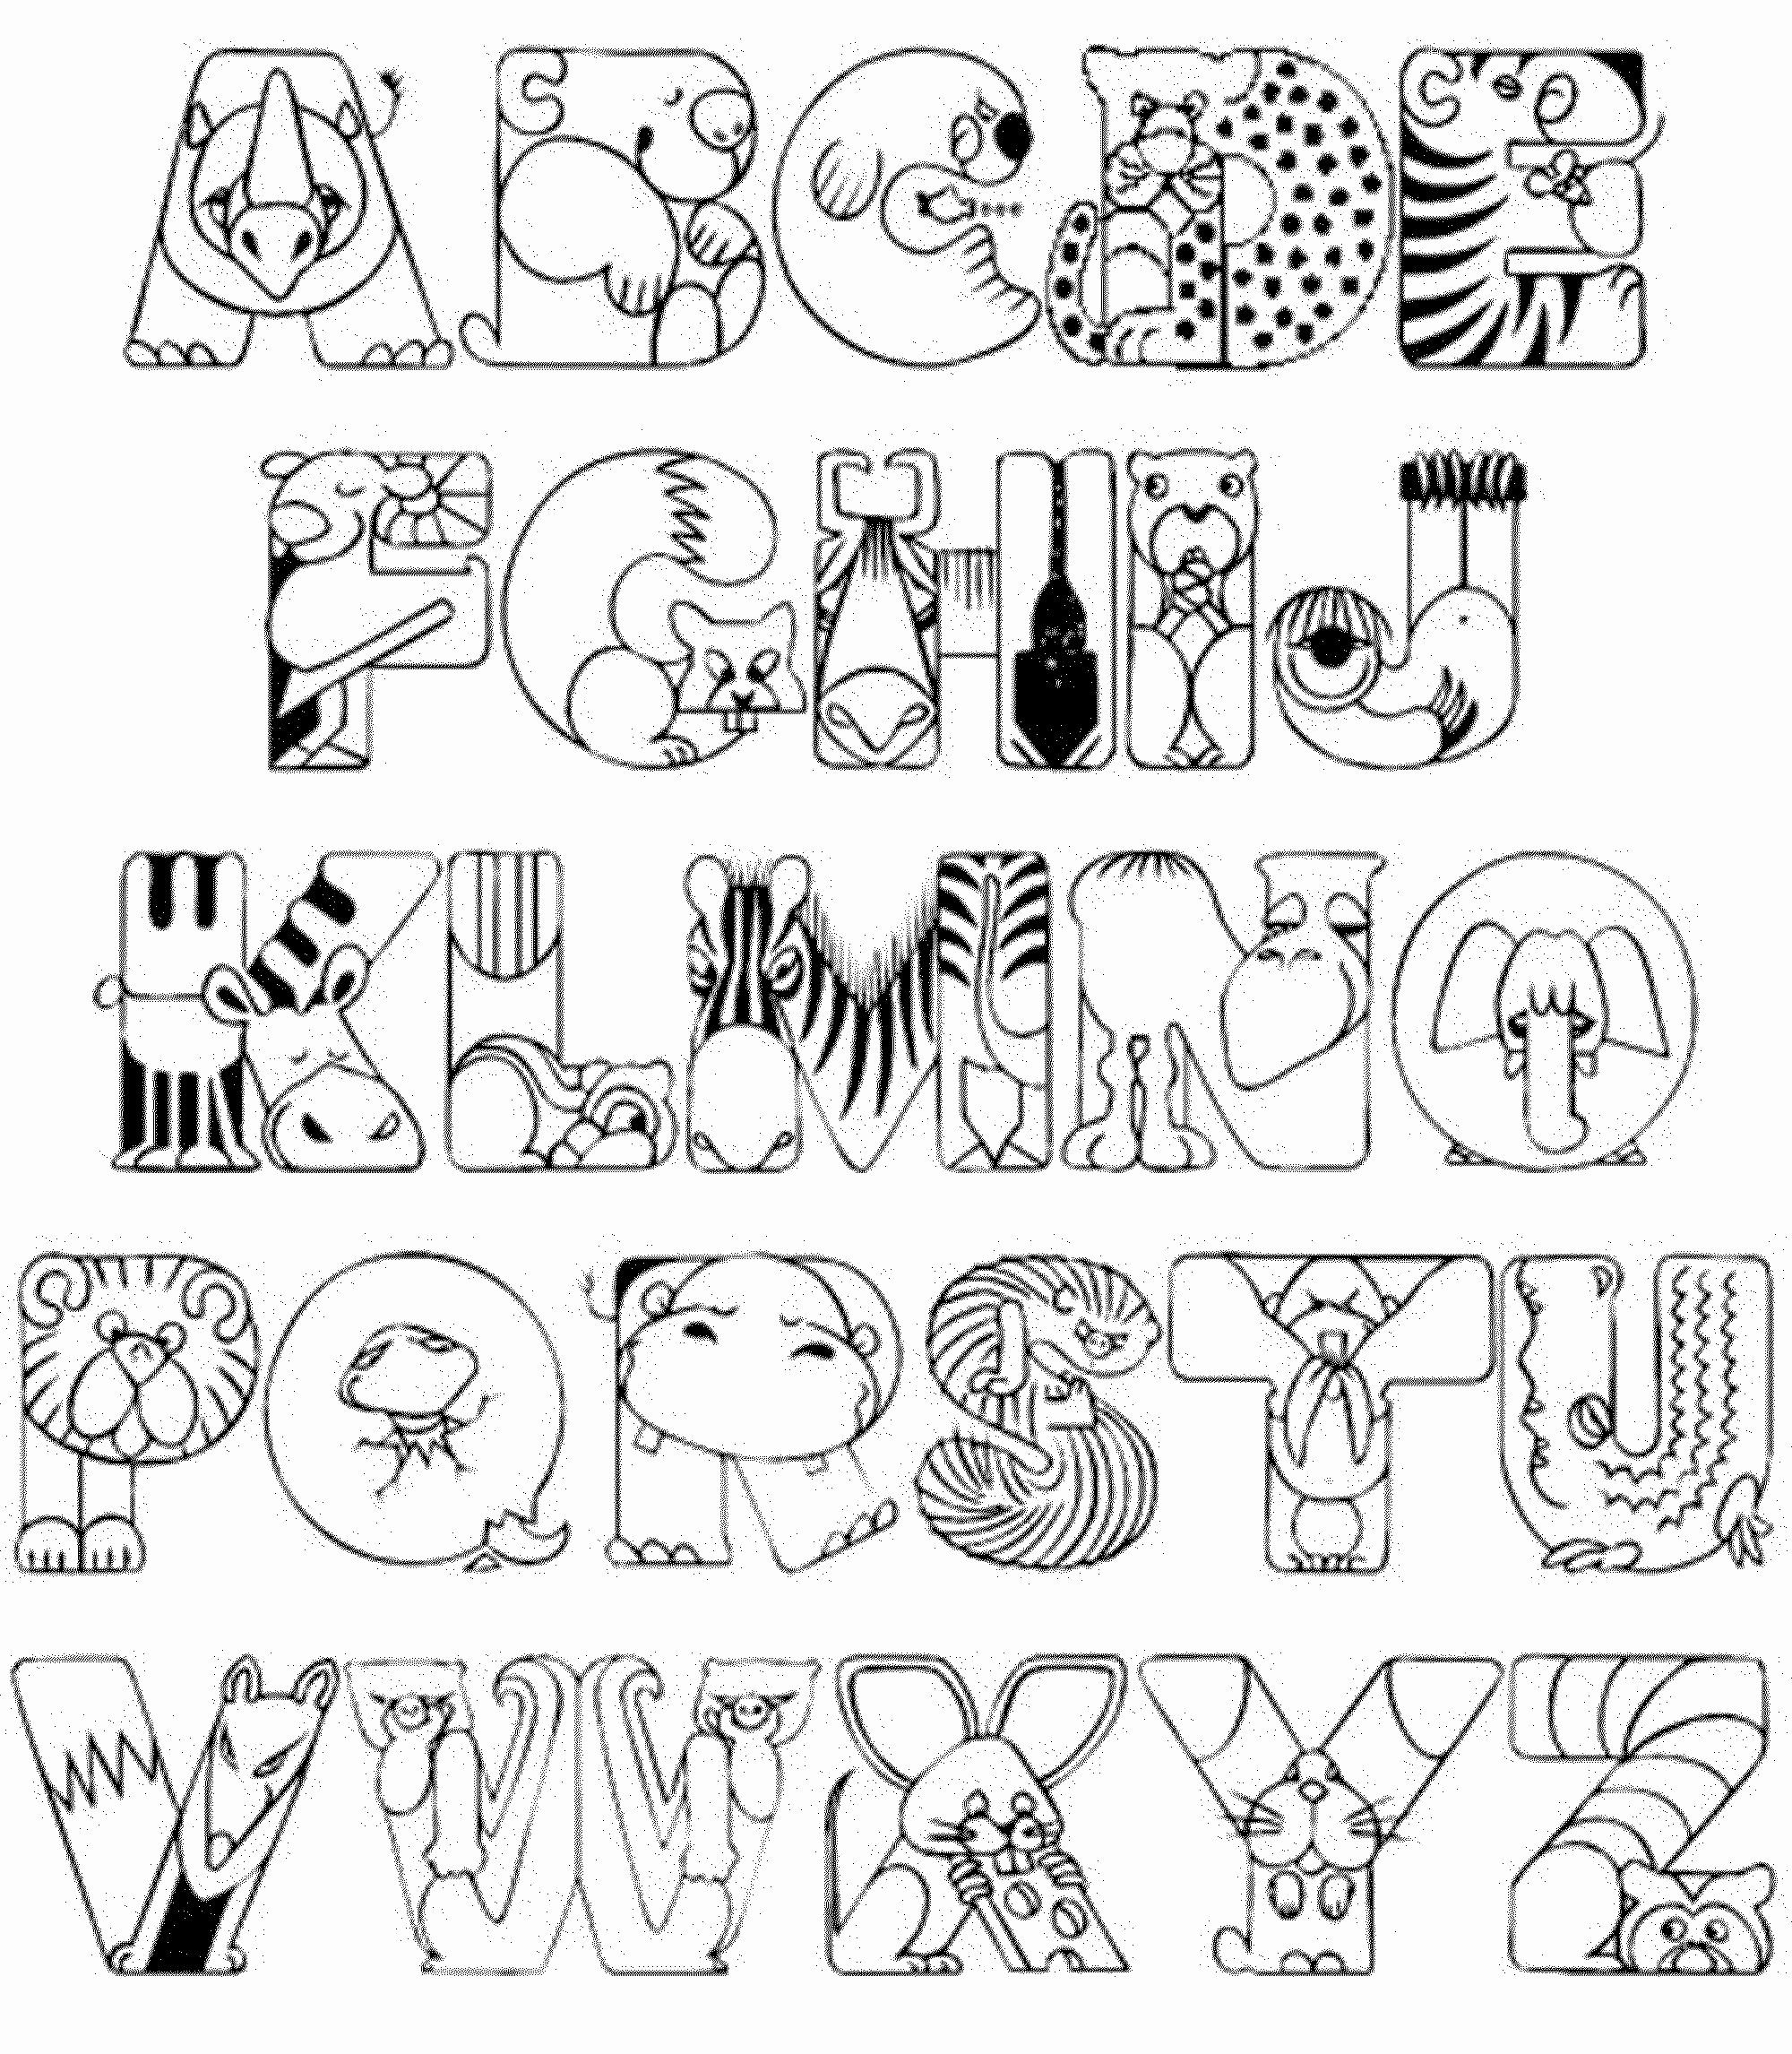 coloring sheetstable tag outstanding free alphabet tracing worksheets kids activity the for and an prep samsfriedchickenanddonuts coloring home